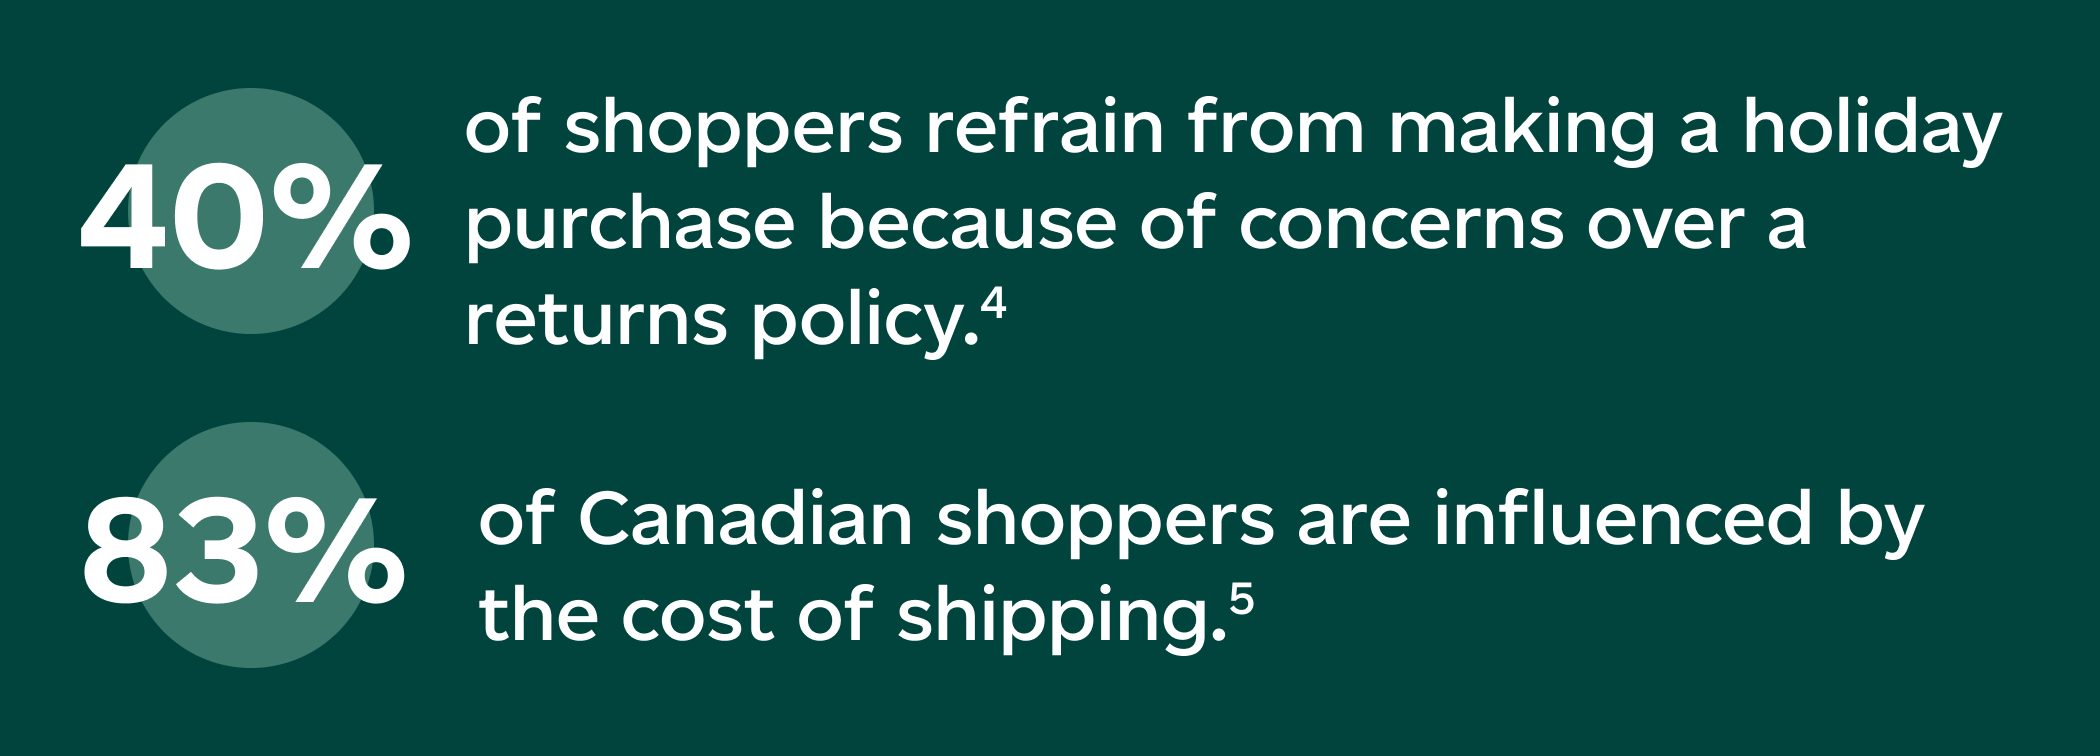 40% of shoppers avoid making a holiday purchase due to returns policy concerns. 83% of Canadian shoppers are influenced by the cost of shipping.